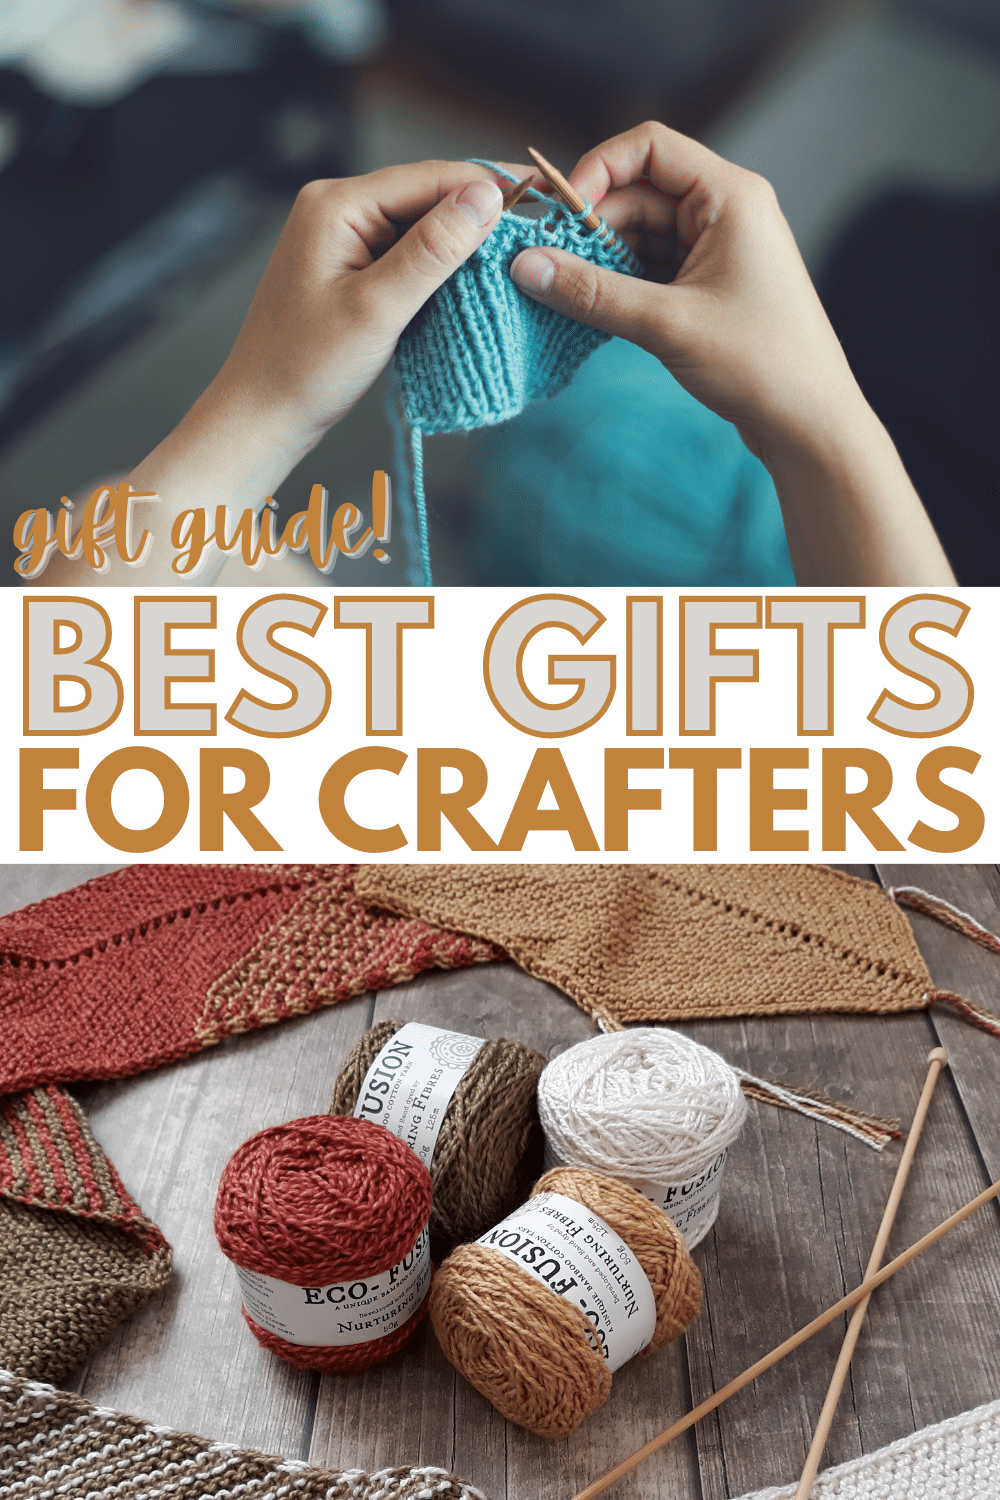 Best Gifts for Crafters with a title text reading Gift Guide! Best Gifts for Crafters